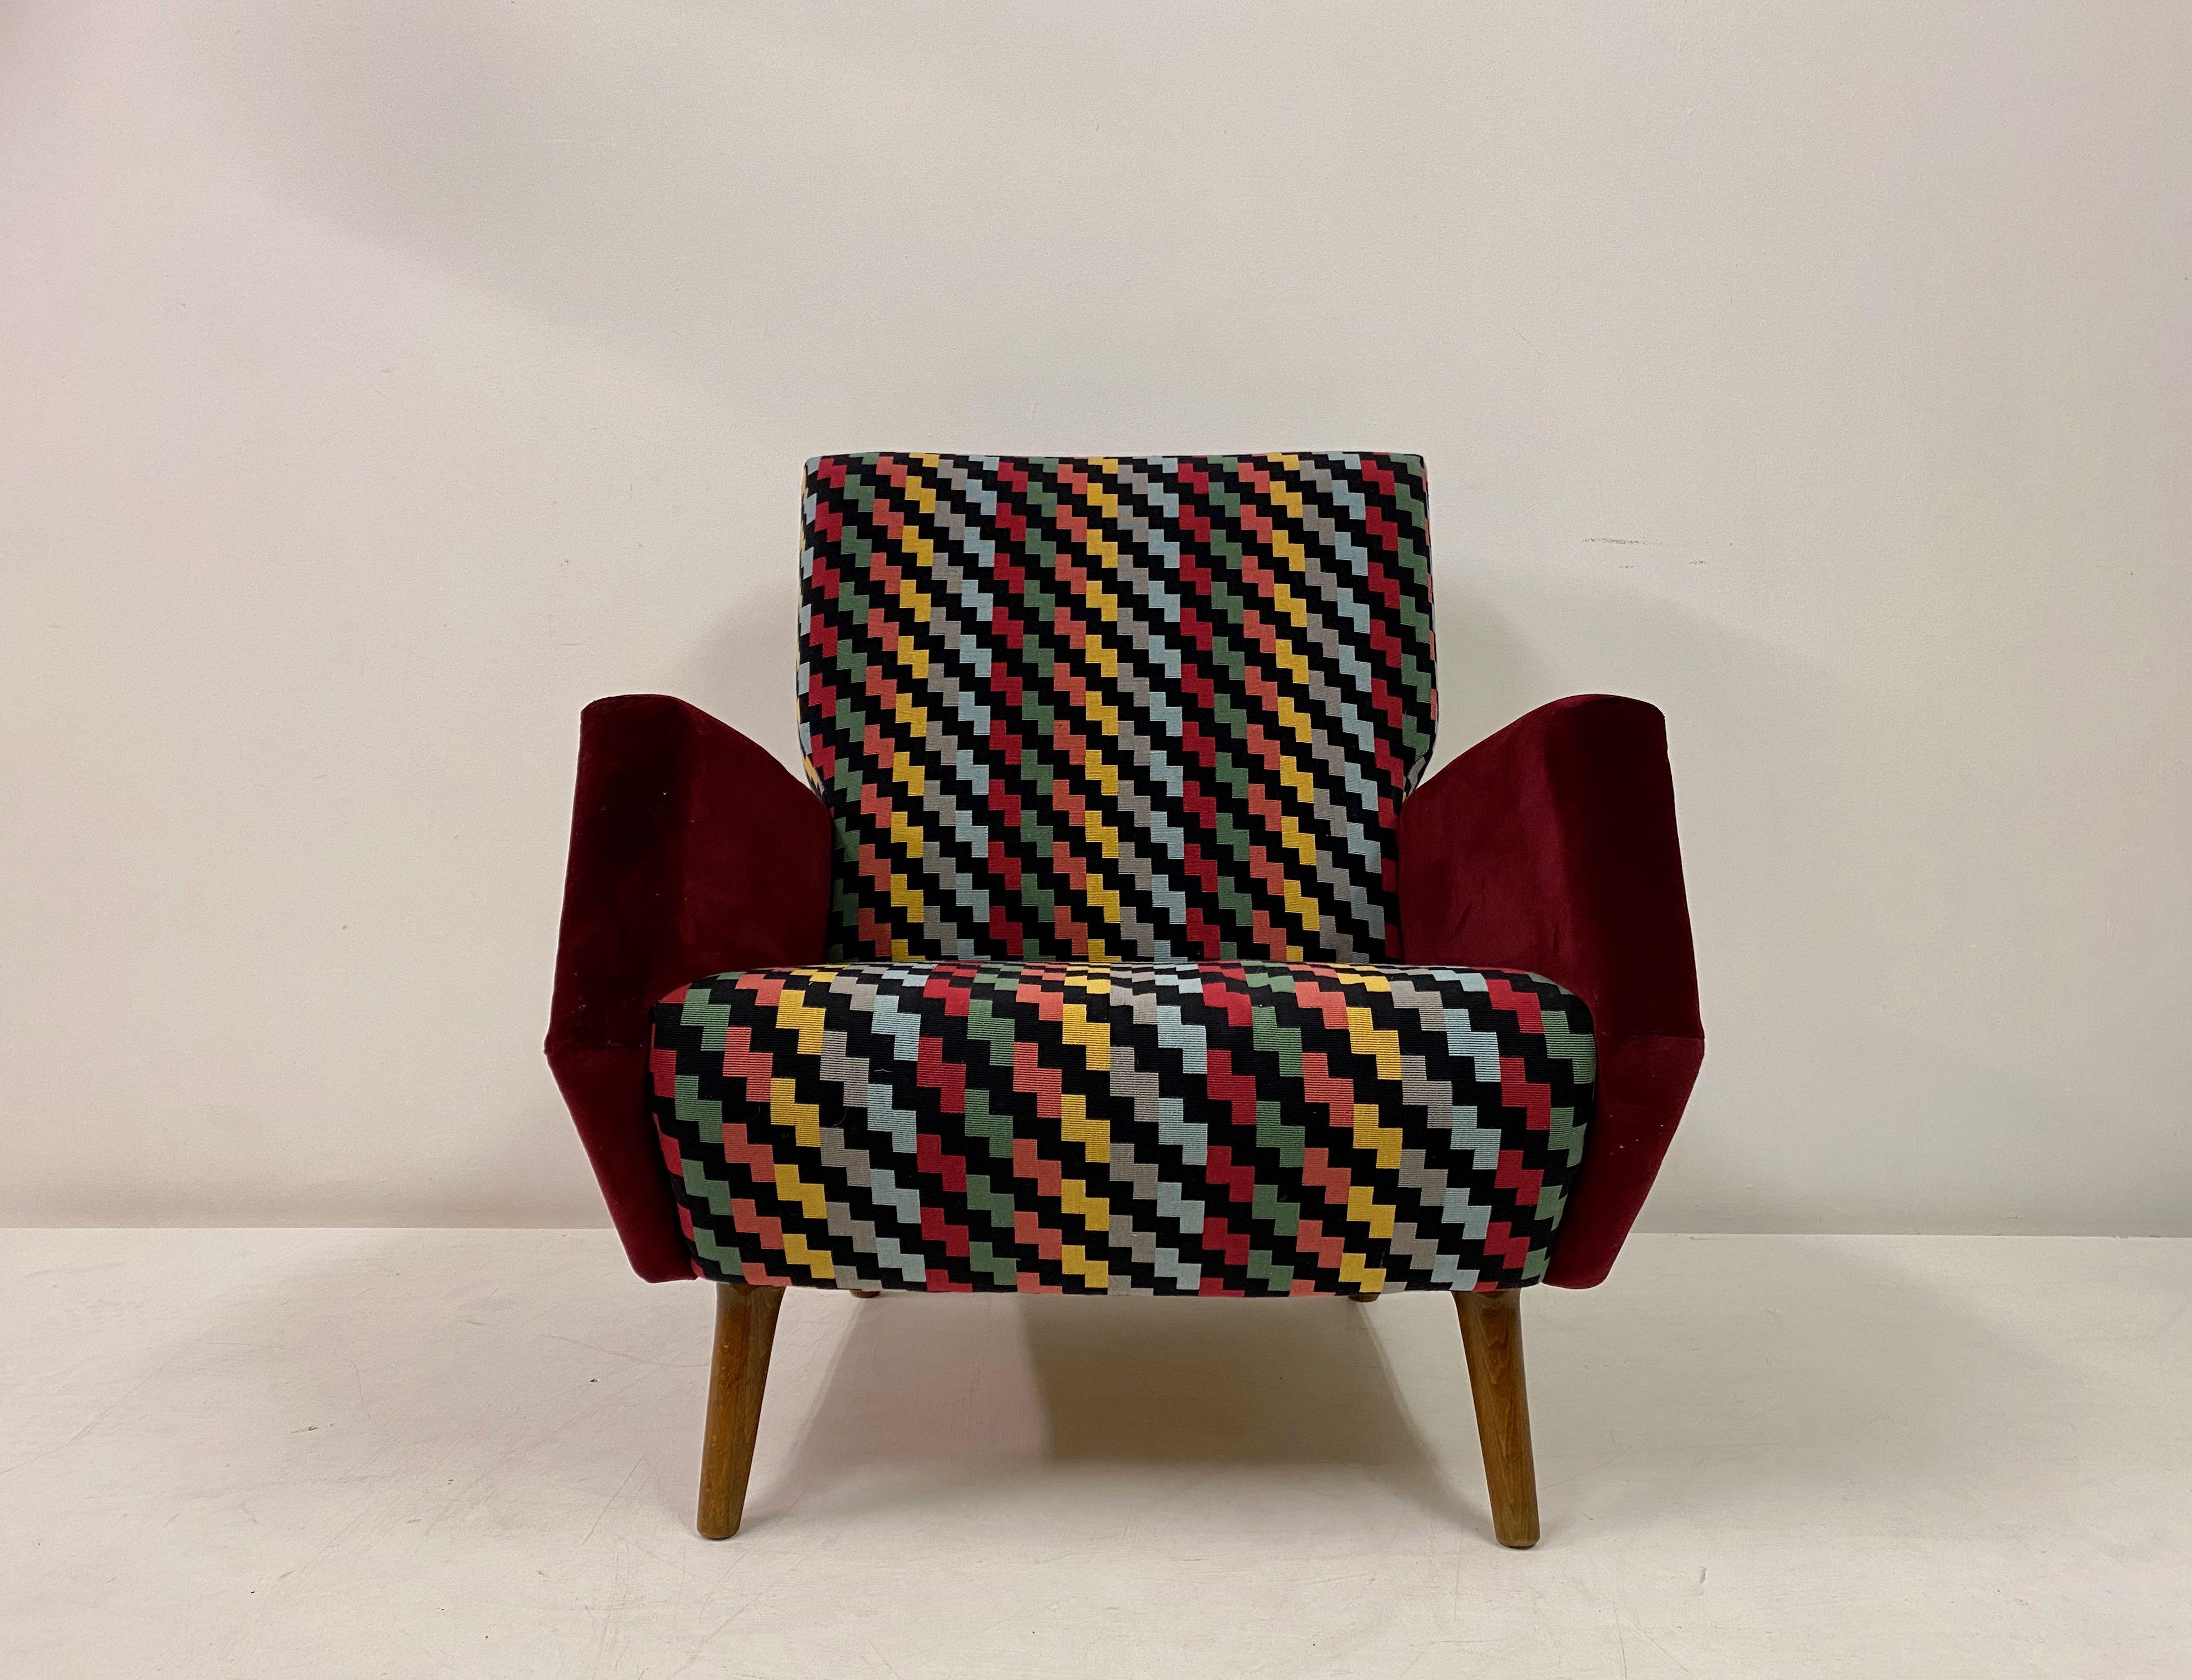 Armchair by Gio Ponti

Model 803

New upholstery

Stained beech legs

Made by Cassina

Retailed by Illums Bolihus (label attached)

Upholstered in Pierre Frey fabric with Vescom velvet arms

Measure: Seat height 38cm

Italy,